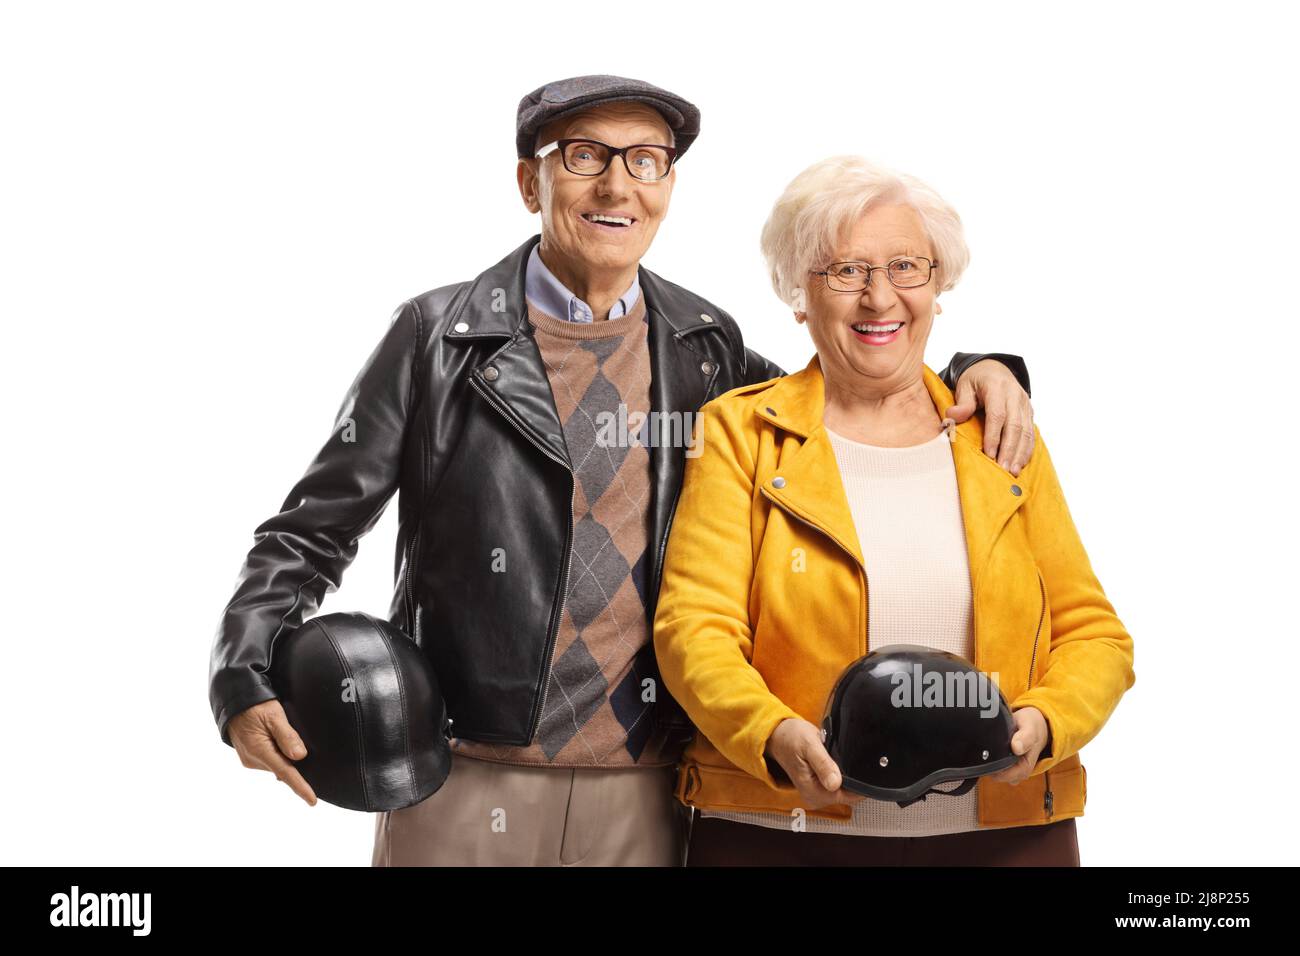 Elderly man and woman standing and holding motorbike helmets isolated on white background Stock Photo